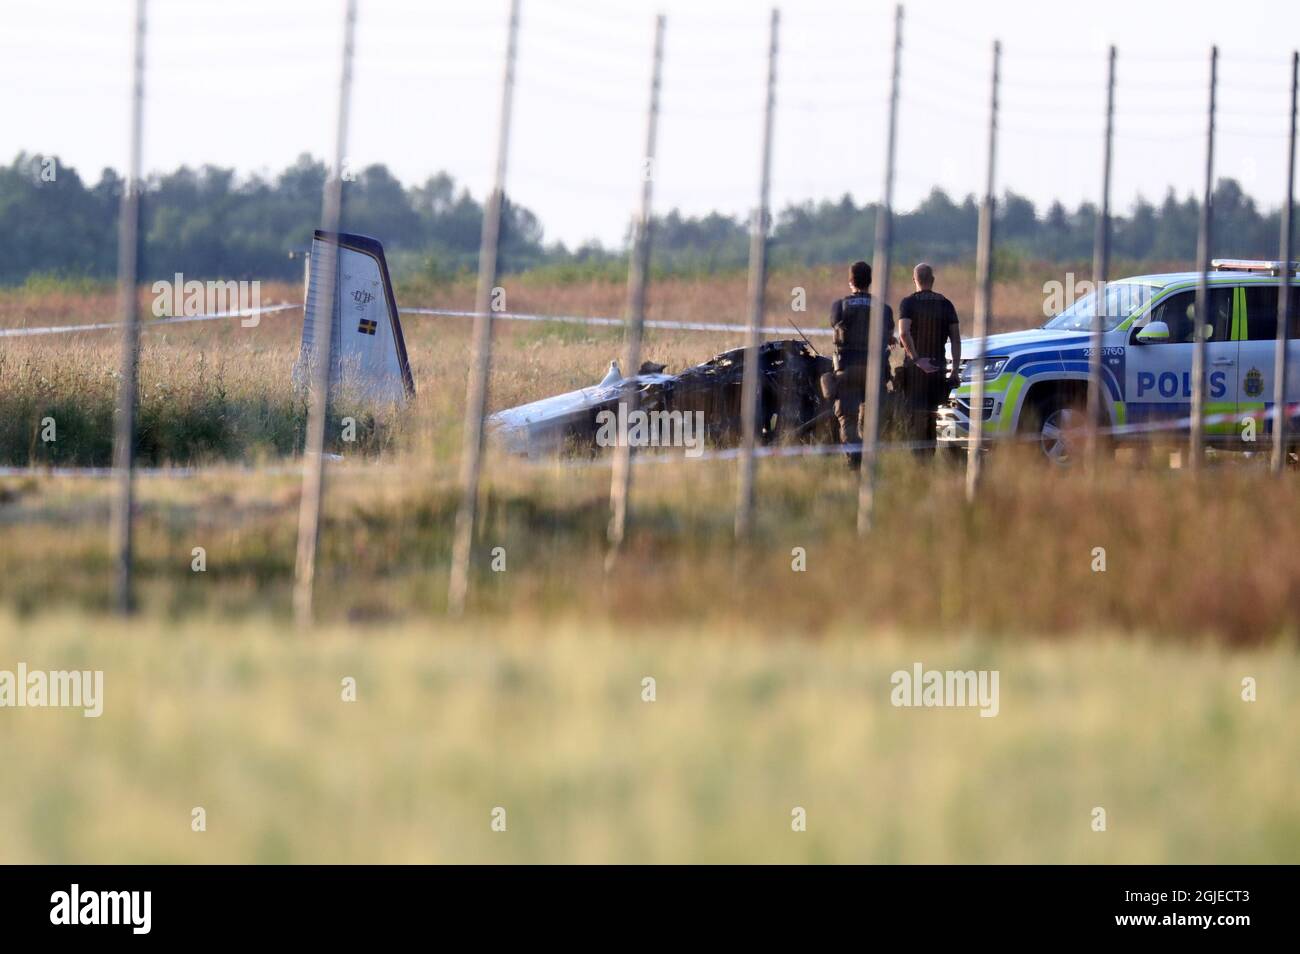 A smal airkraft has crashed at Orebro Airport in Sweden July 8 2021. The airplane was used by the local parachute club with nine people on board. According to the police several people have died in the plane crash Photo: Jeppe Gustafsson/TT Kod 71500  Stock Photo